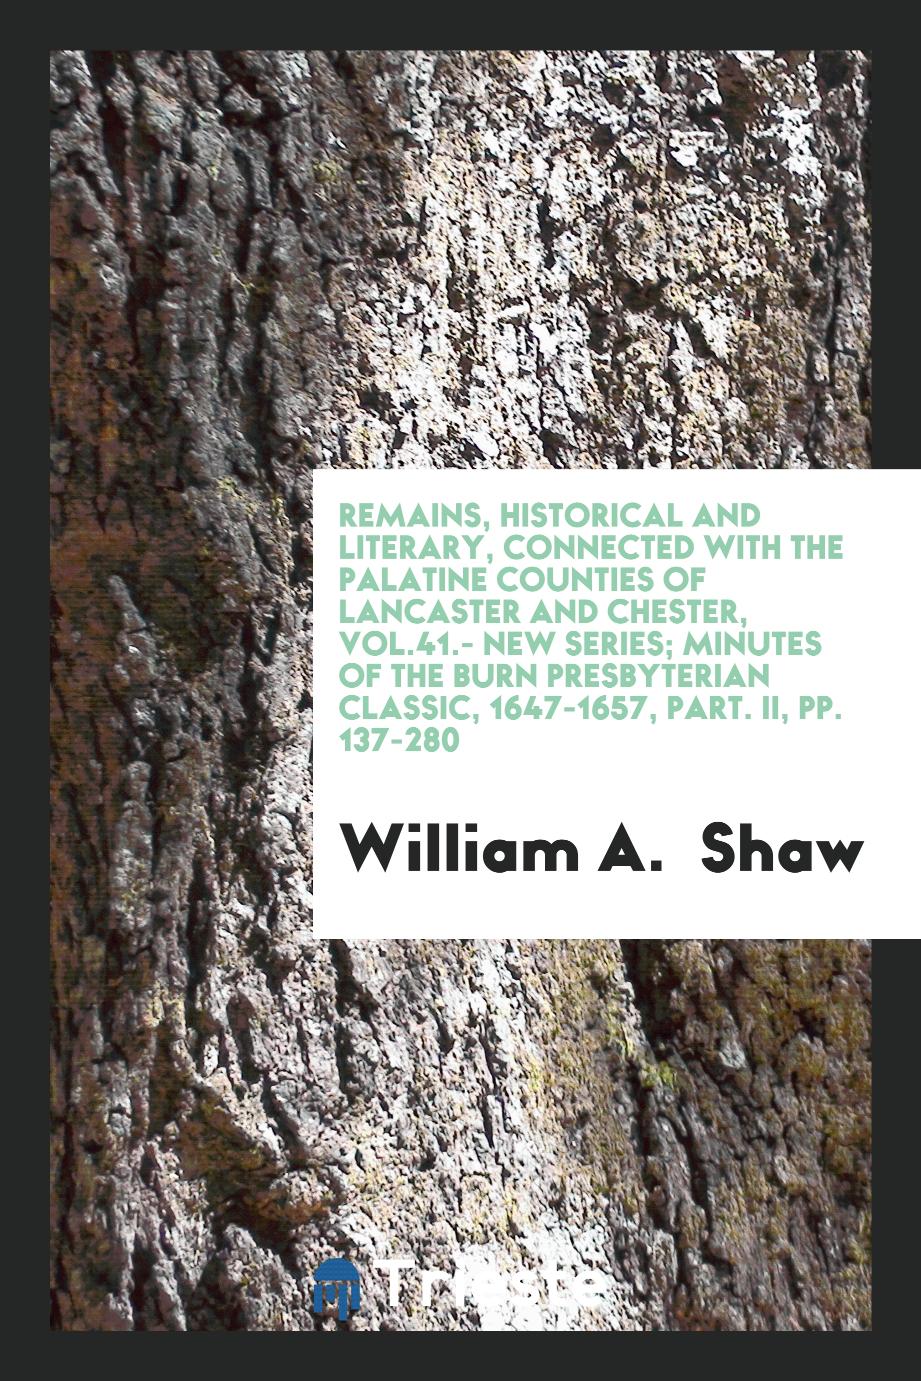 Remains, Historical and Literary, Connected with the Palatine Counties of Lancaster and Chester, Vol.41.- New Series; Minutes of the Burn Presbyterian Classic, 1647-1657, Part. II, pp. 137-280